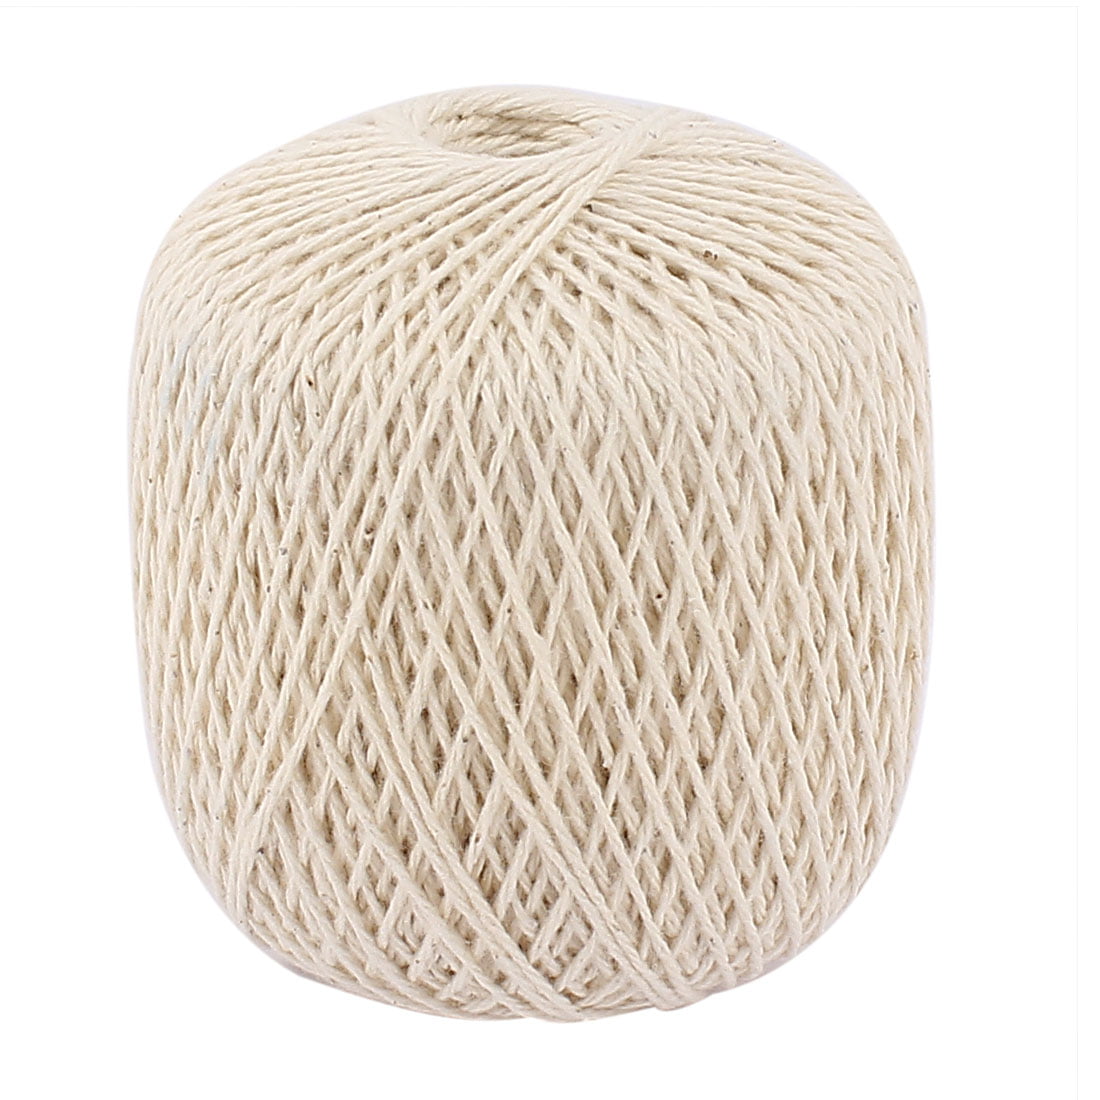 Beige Cotton Packaging Label Binding Sewing Twine String Rope 100M